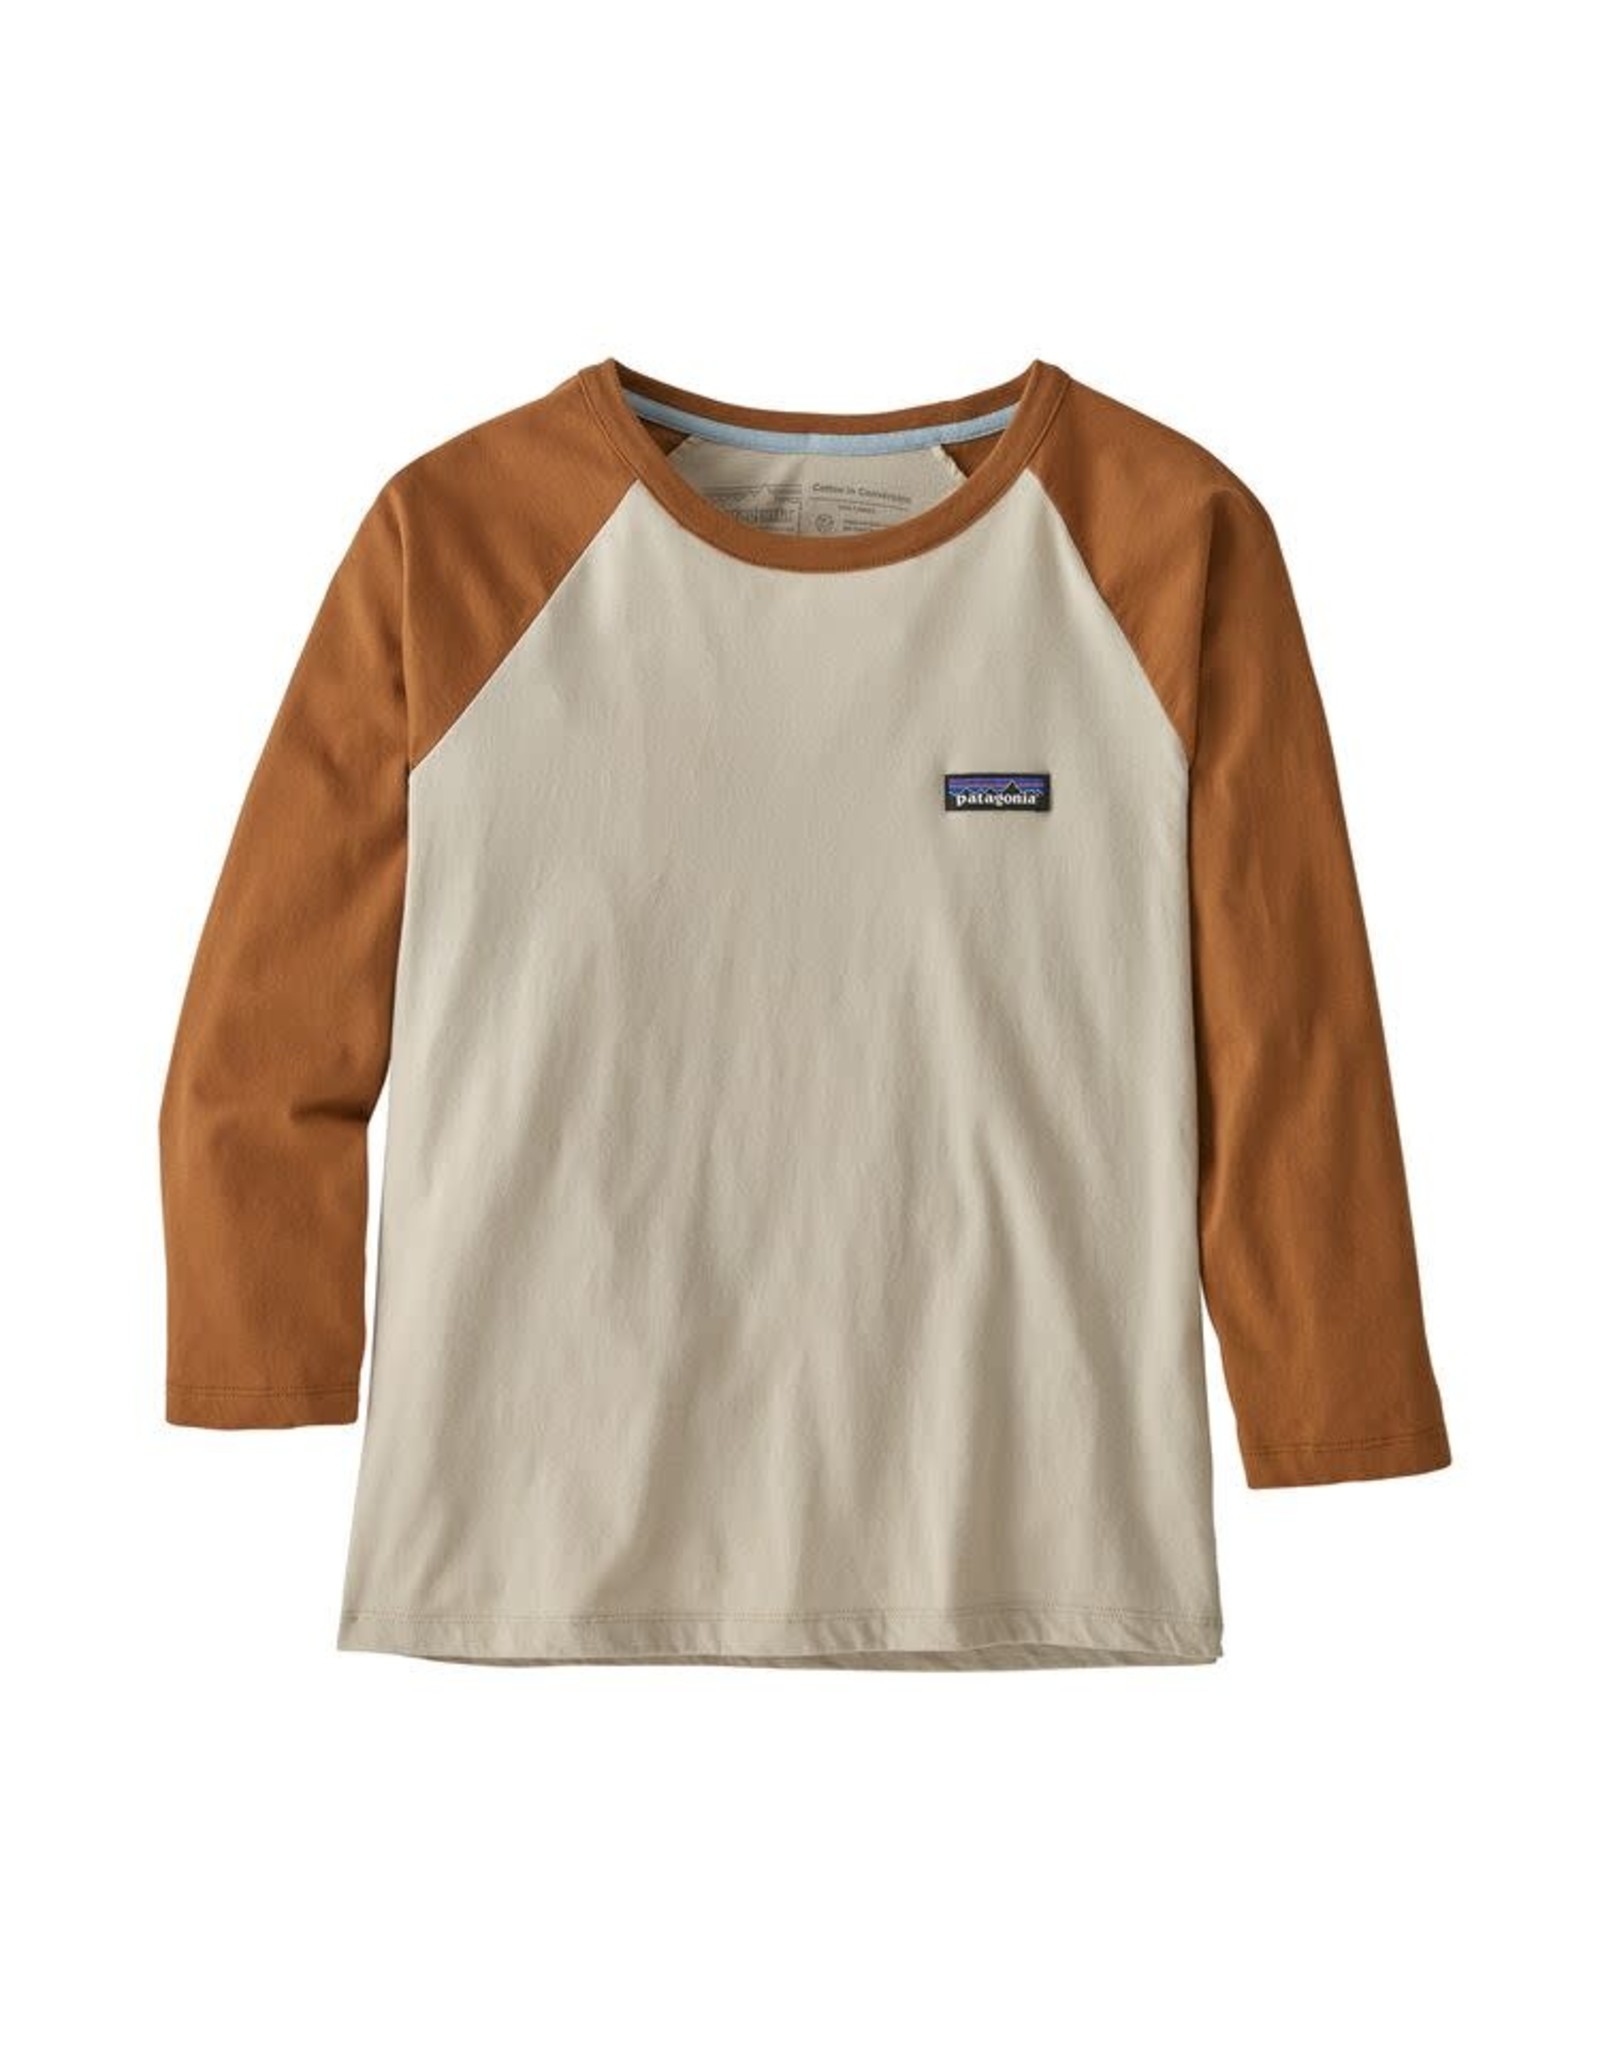 Patagonia W's Cotton in Coversion Top